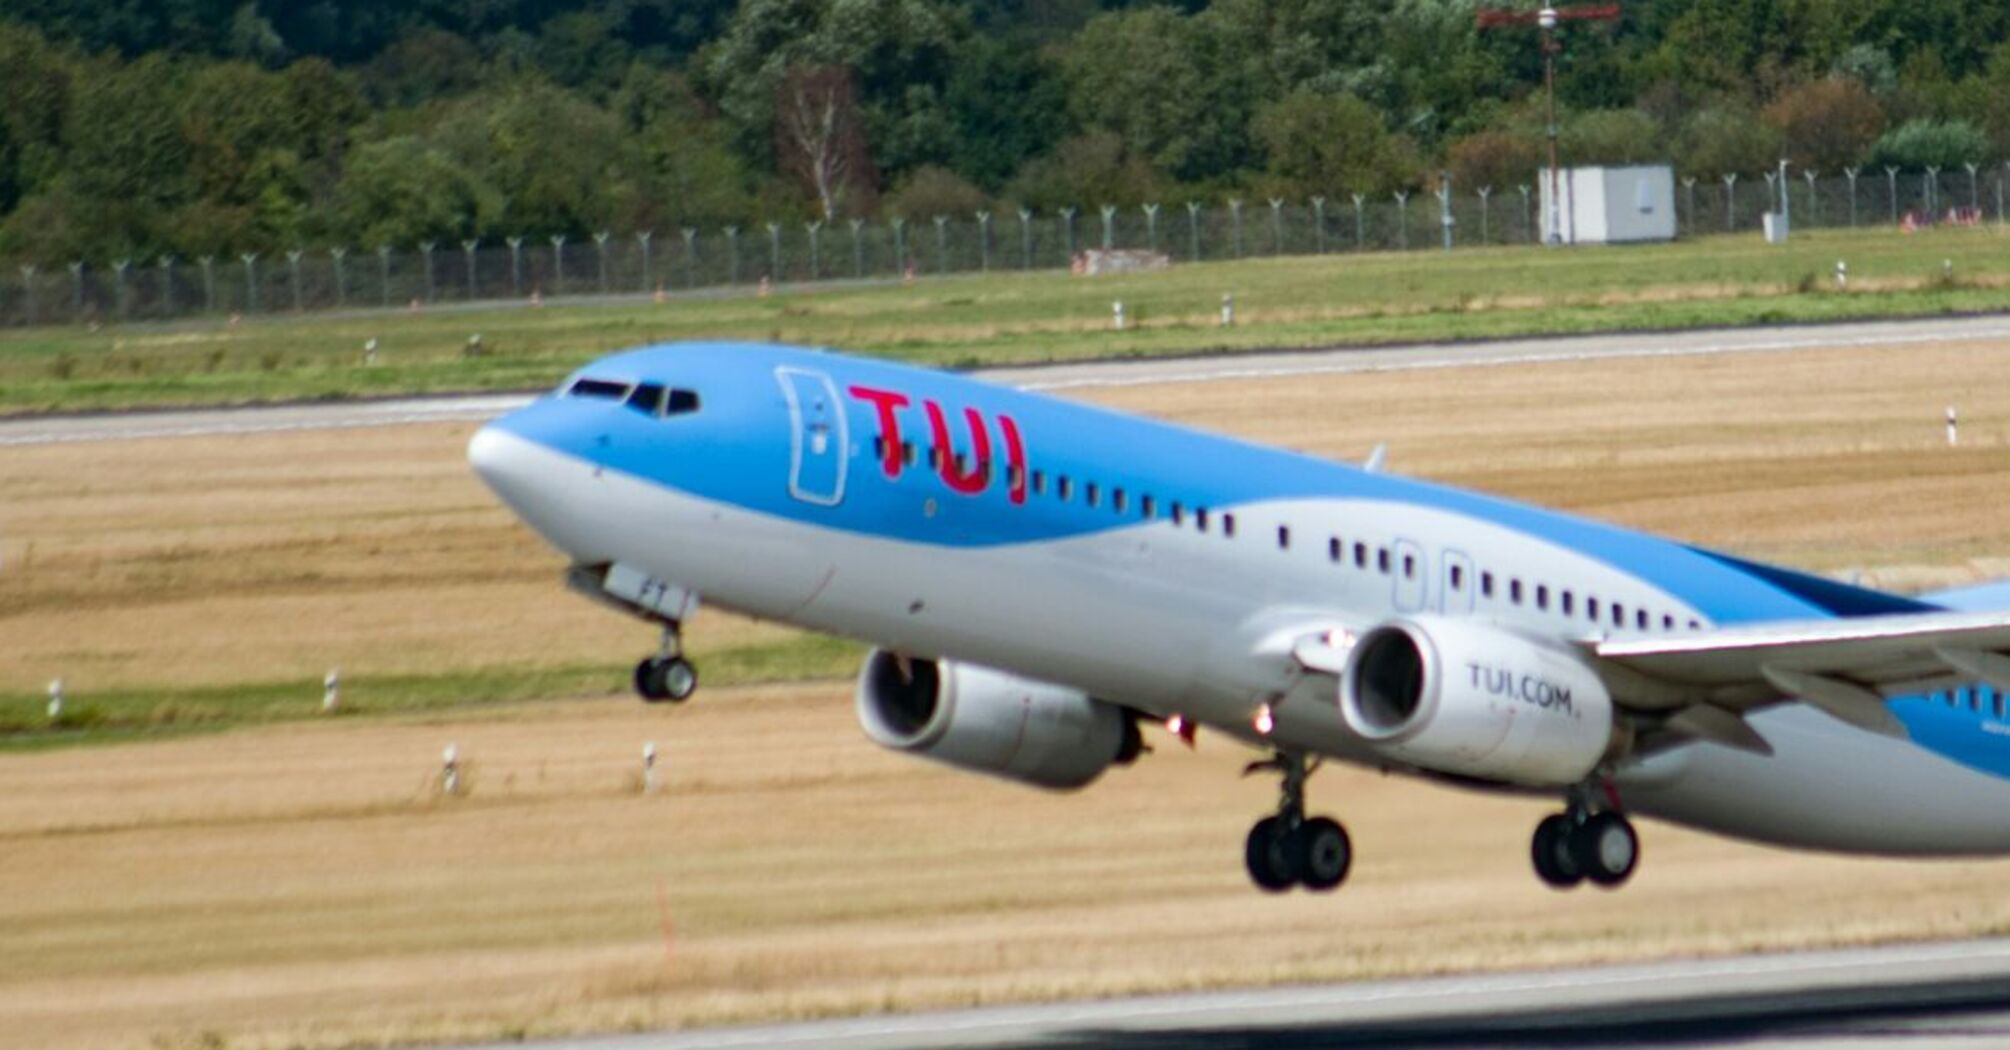 Loud scandal: TUI apologises for the advertising that called slave owners "brave ancestors" of the Dutch